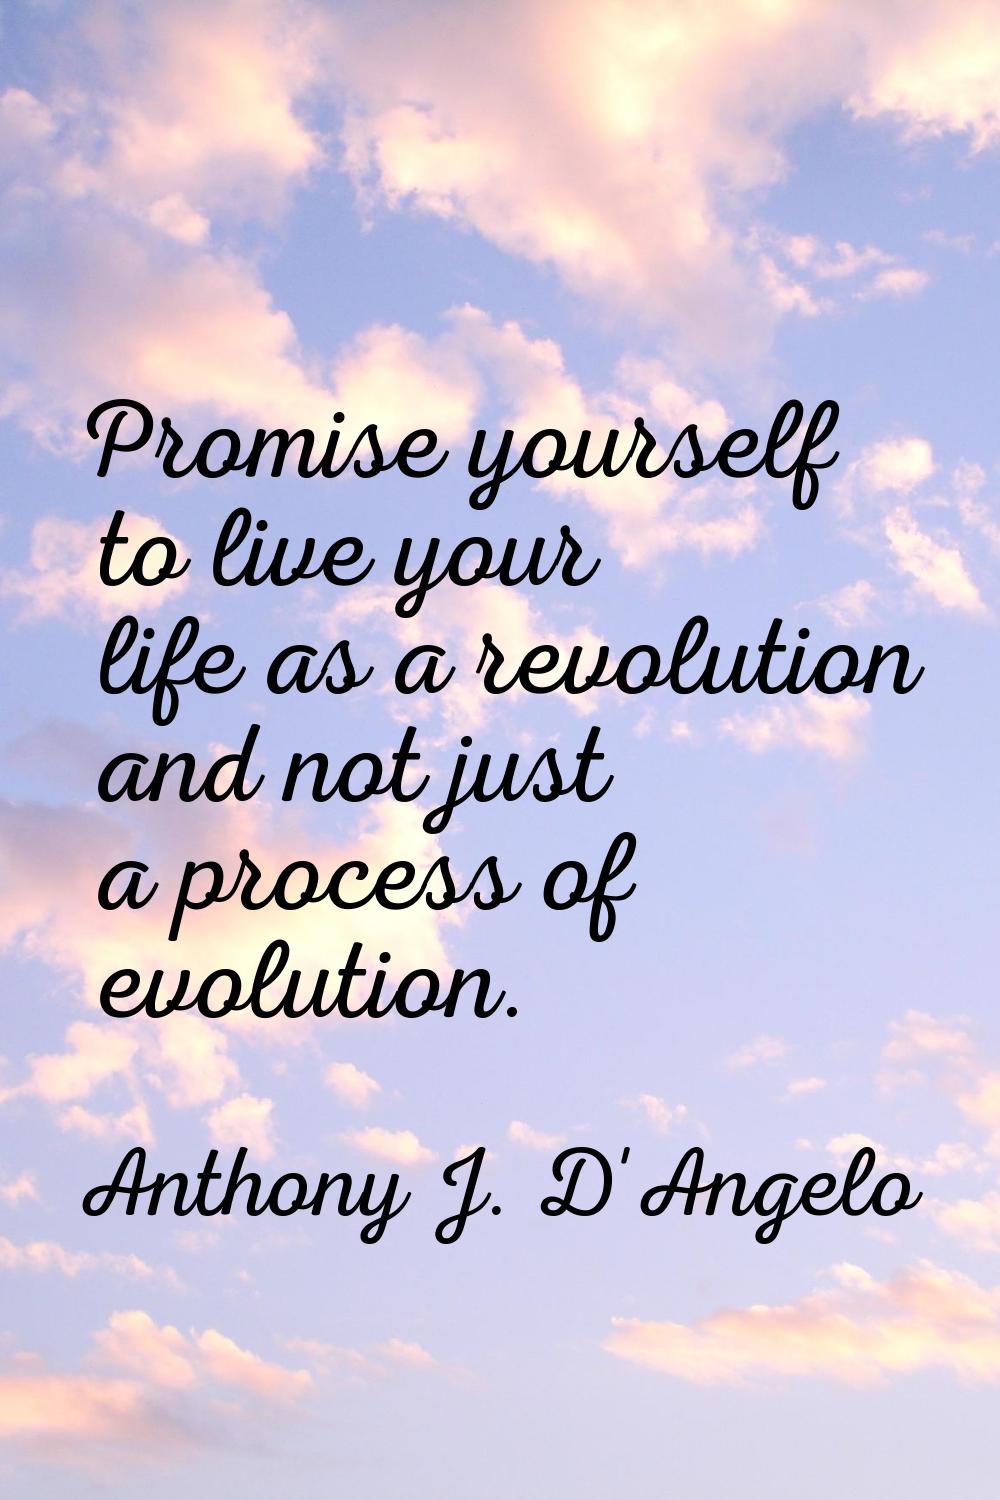 Promise yourself to live your life as a revolution and not just a process of evolution.